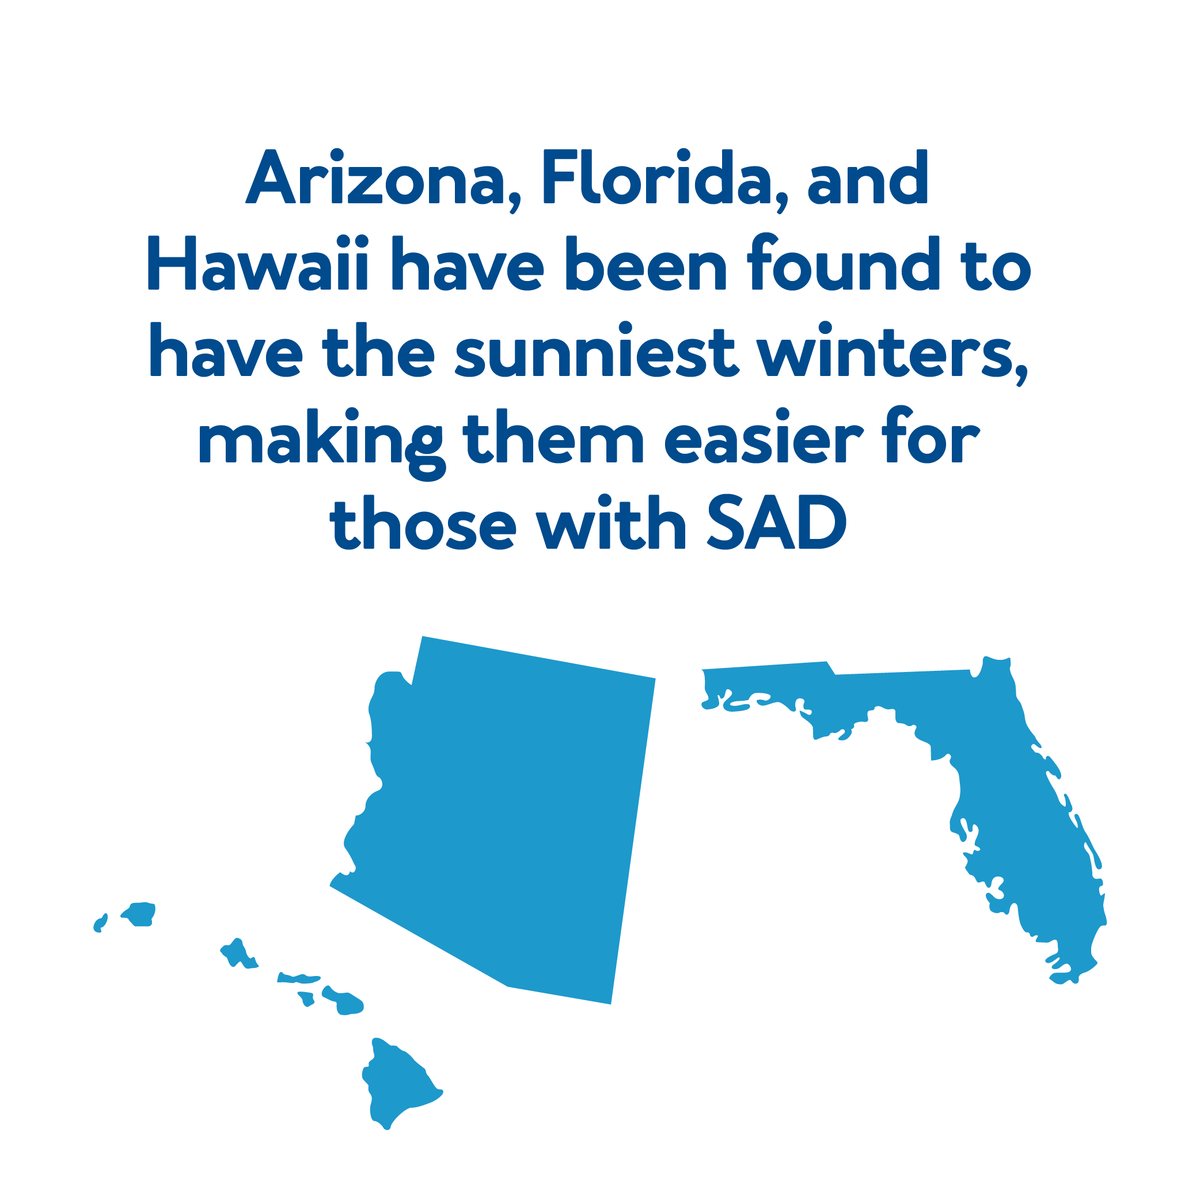 Arizona, Florida, and Hawaii have been found to have the sunniest winters, making them easier for those with SAD .